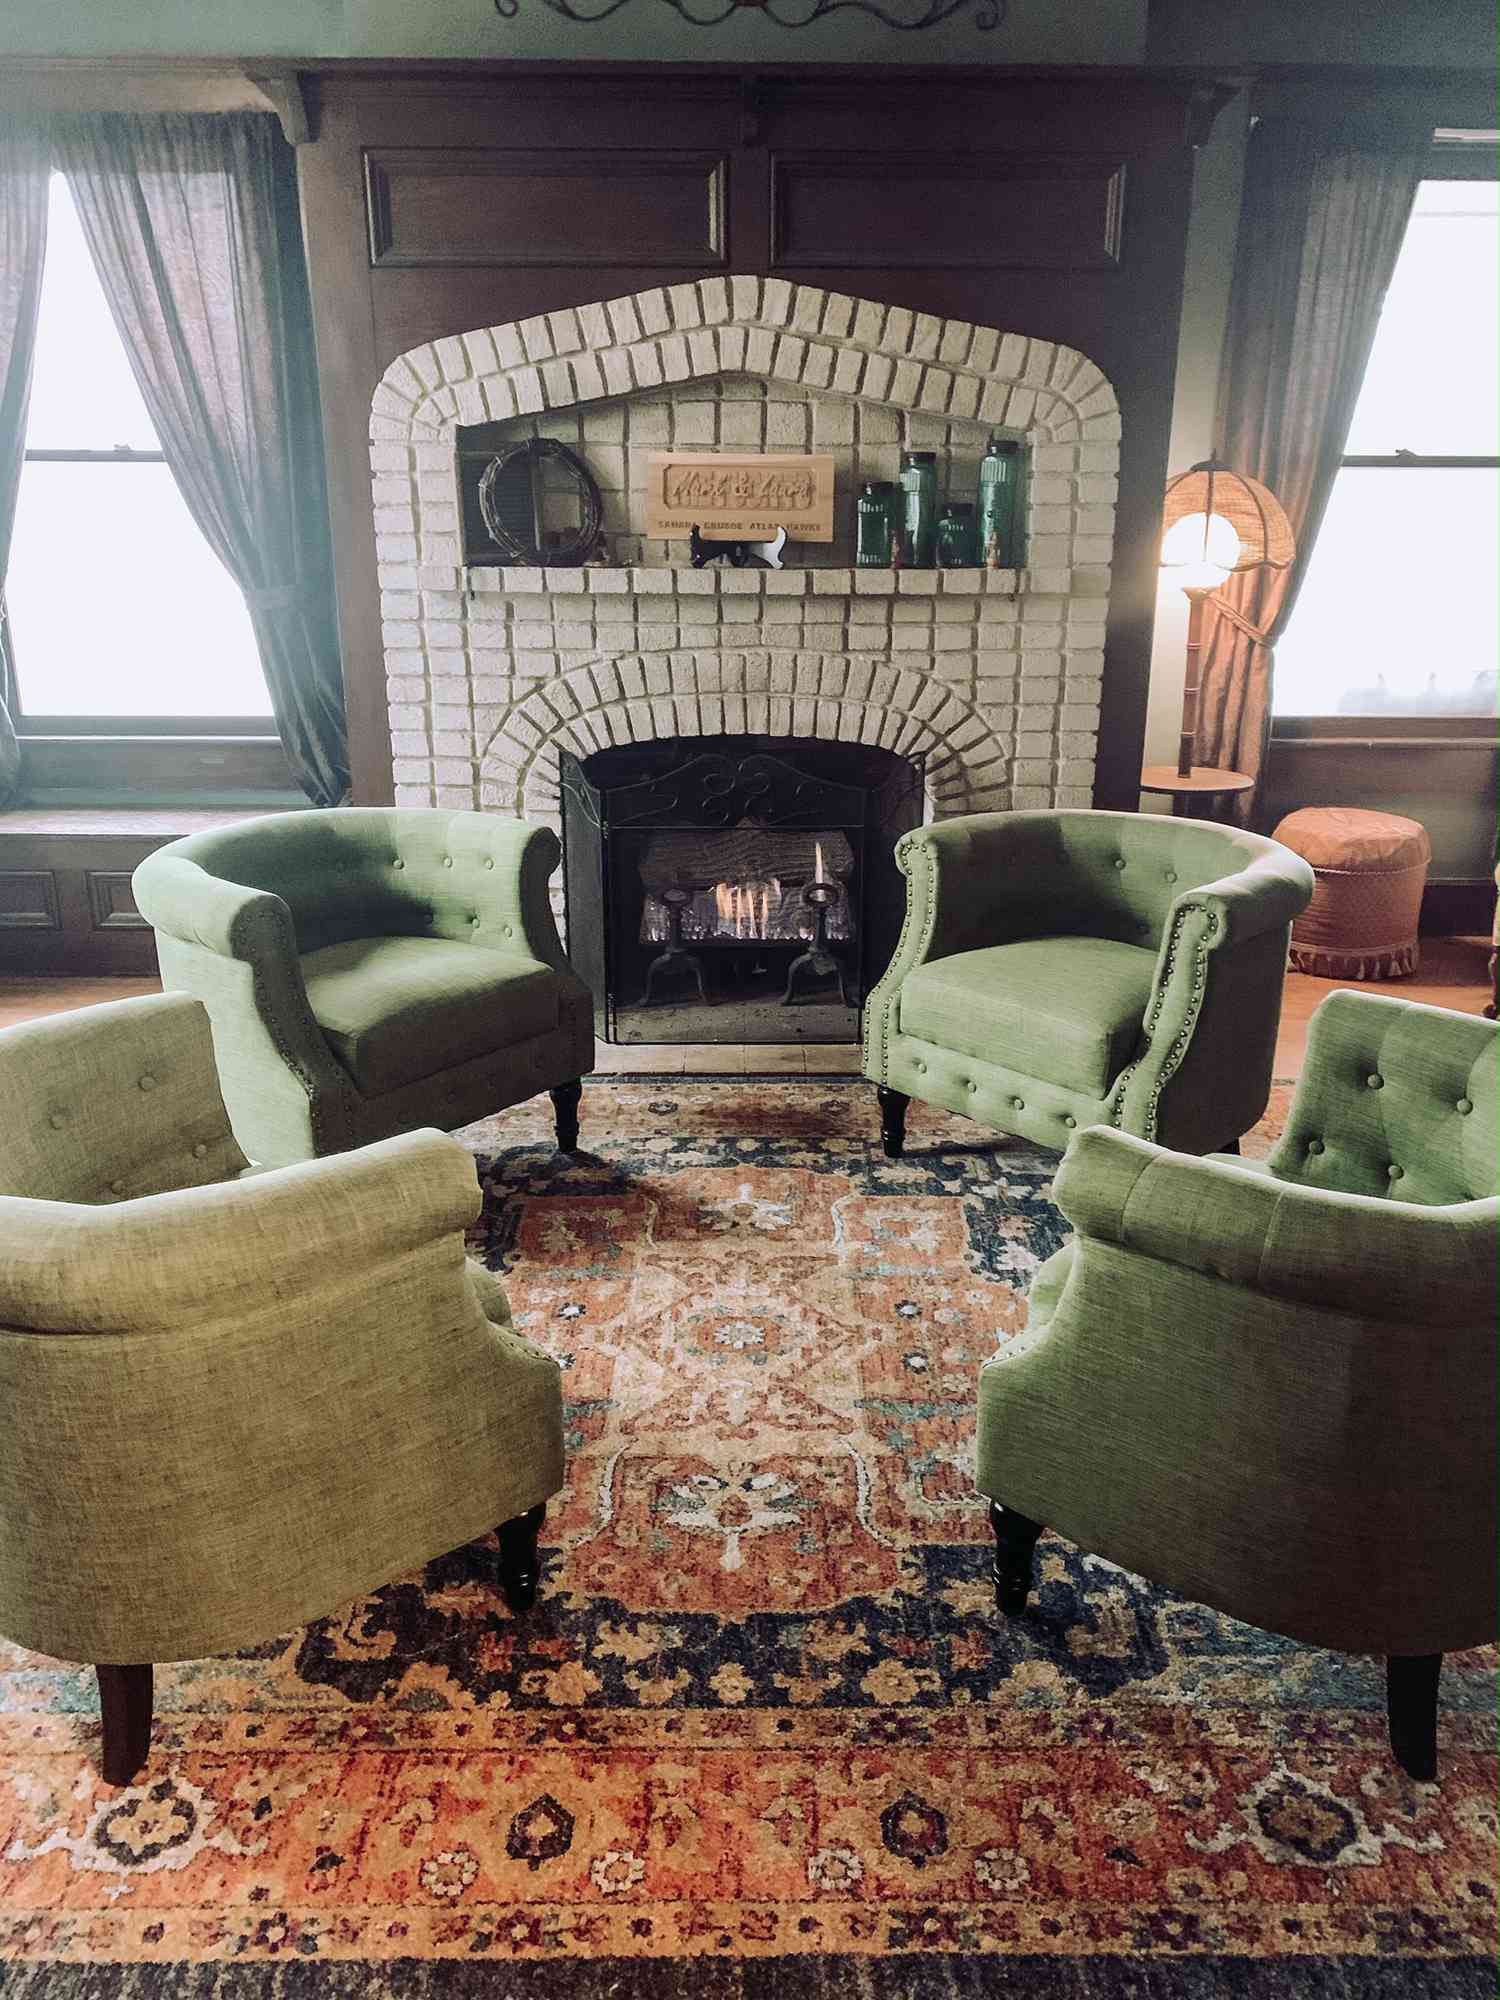 1890 American foursquare lounge with fireplace